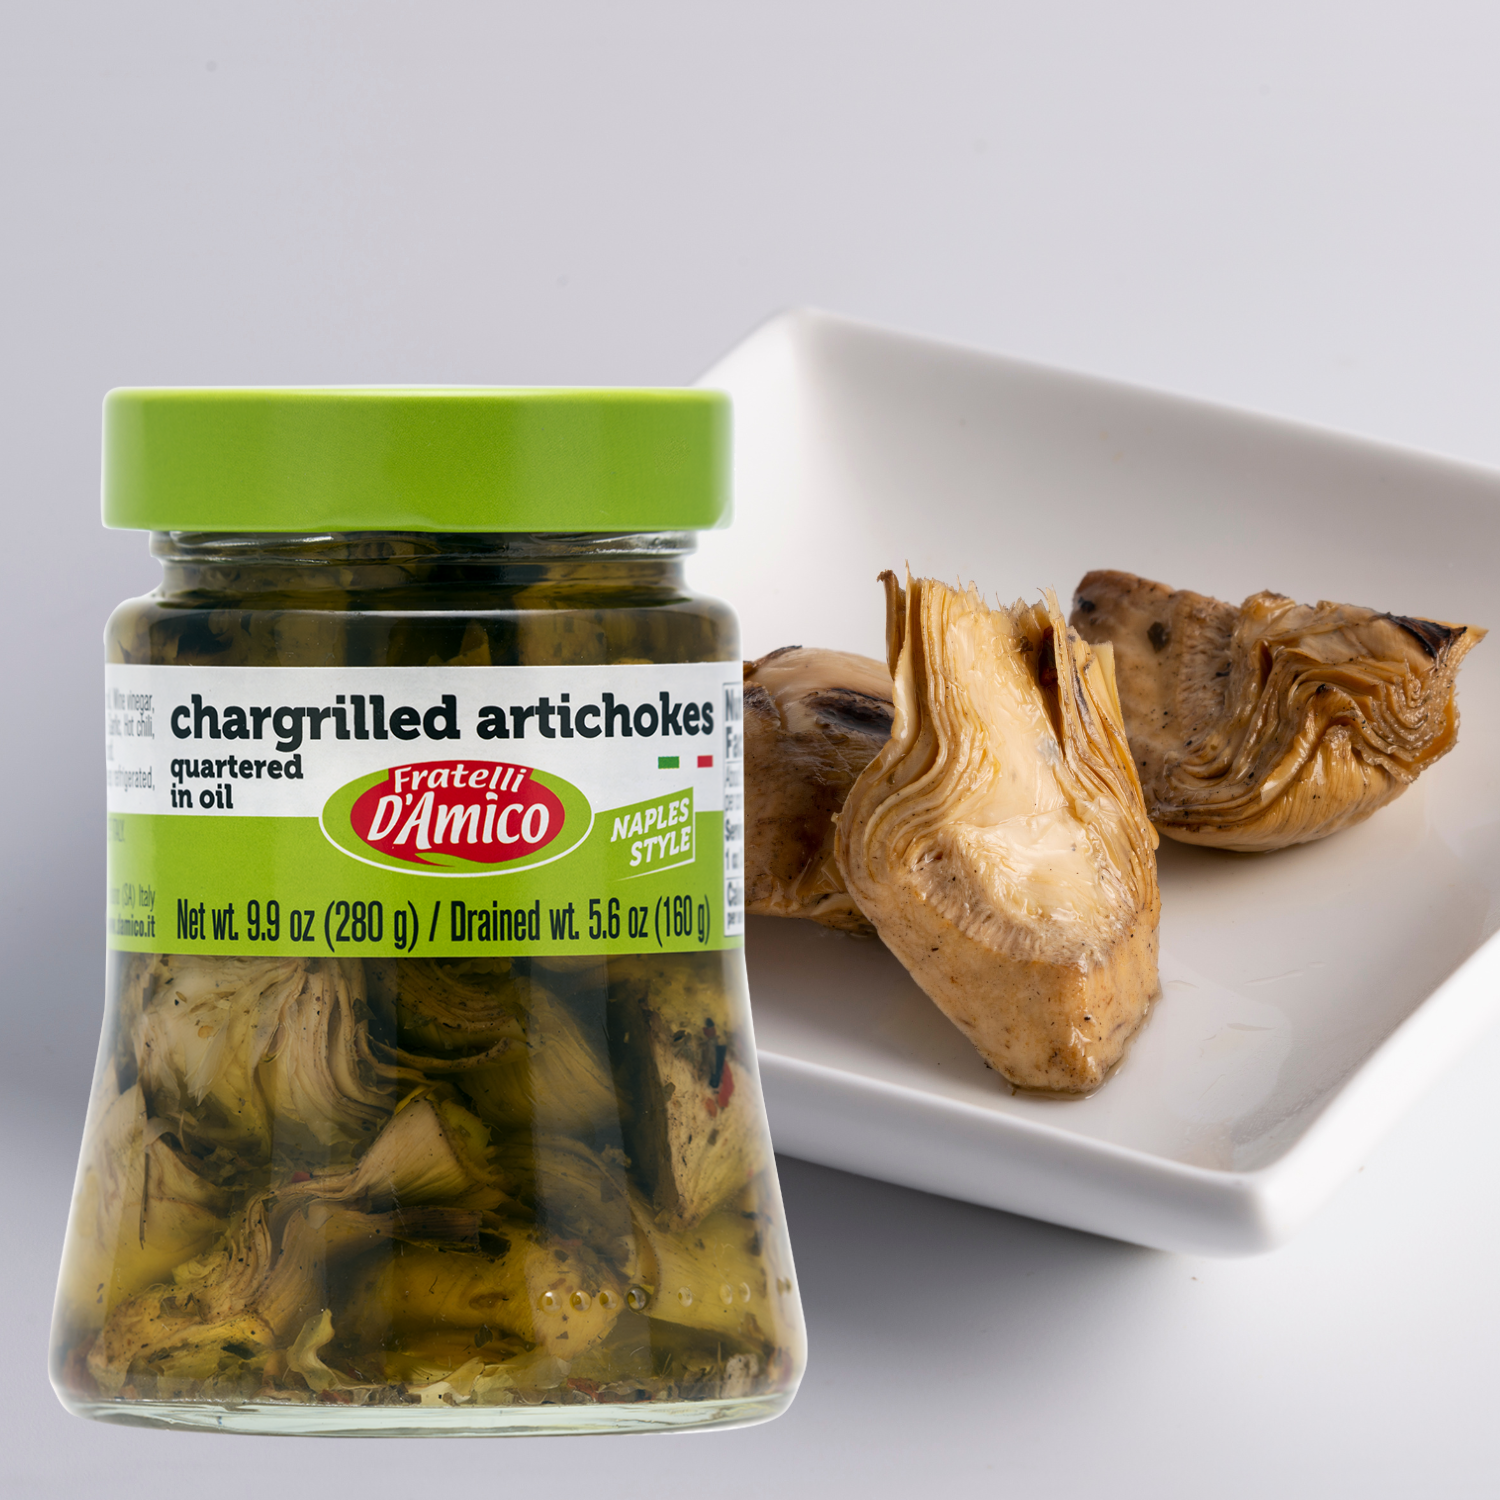 Fratelli D'Amico, Chargrilled Artichokes, Quartered in Oil, Grilled, Naples Style, 9.9oz (280g